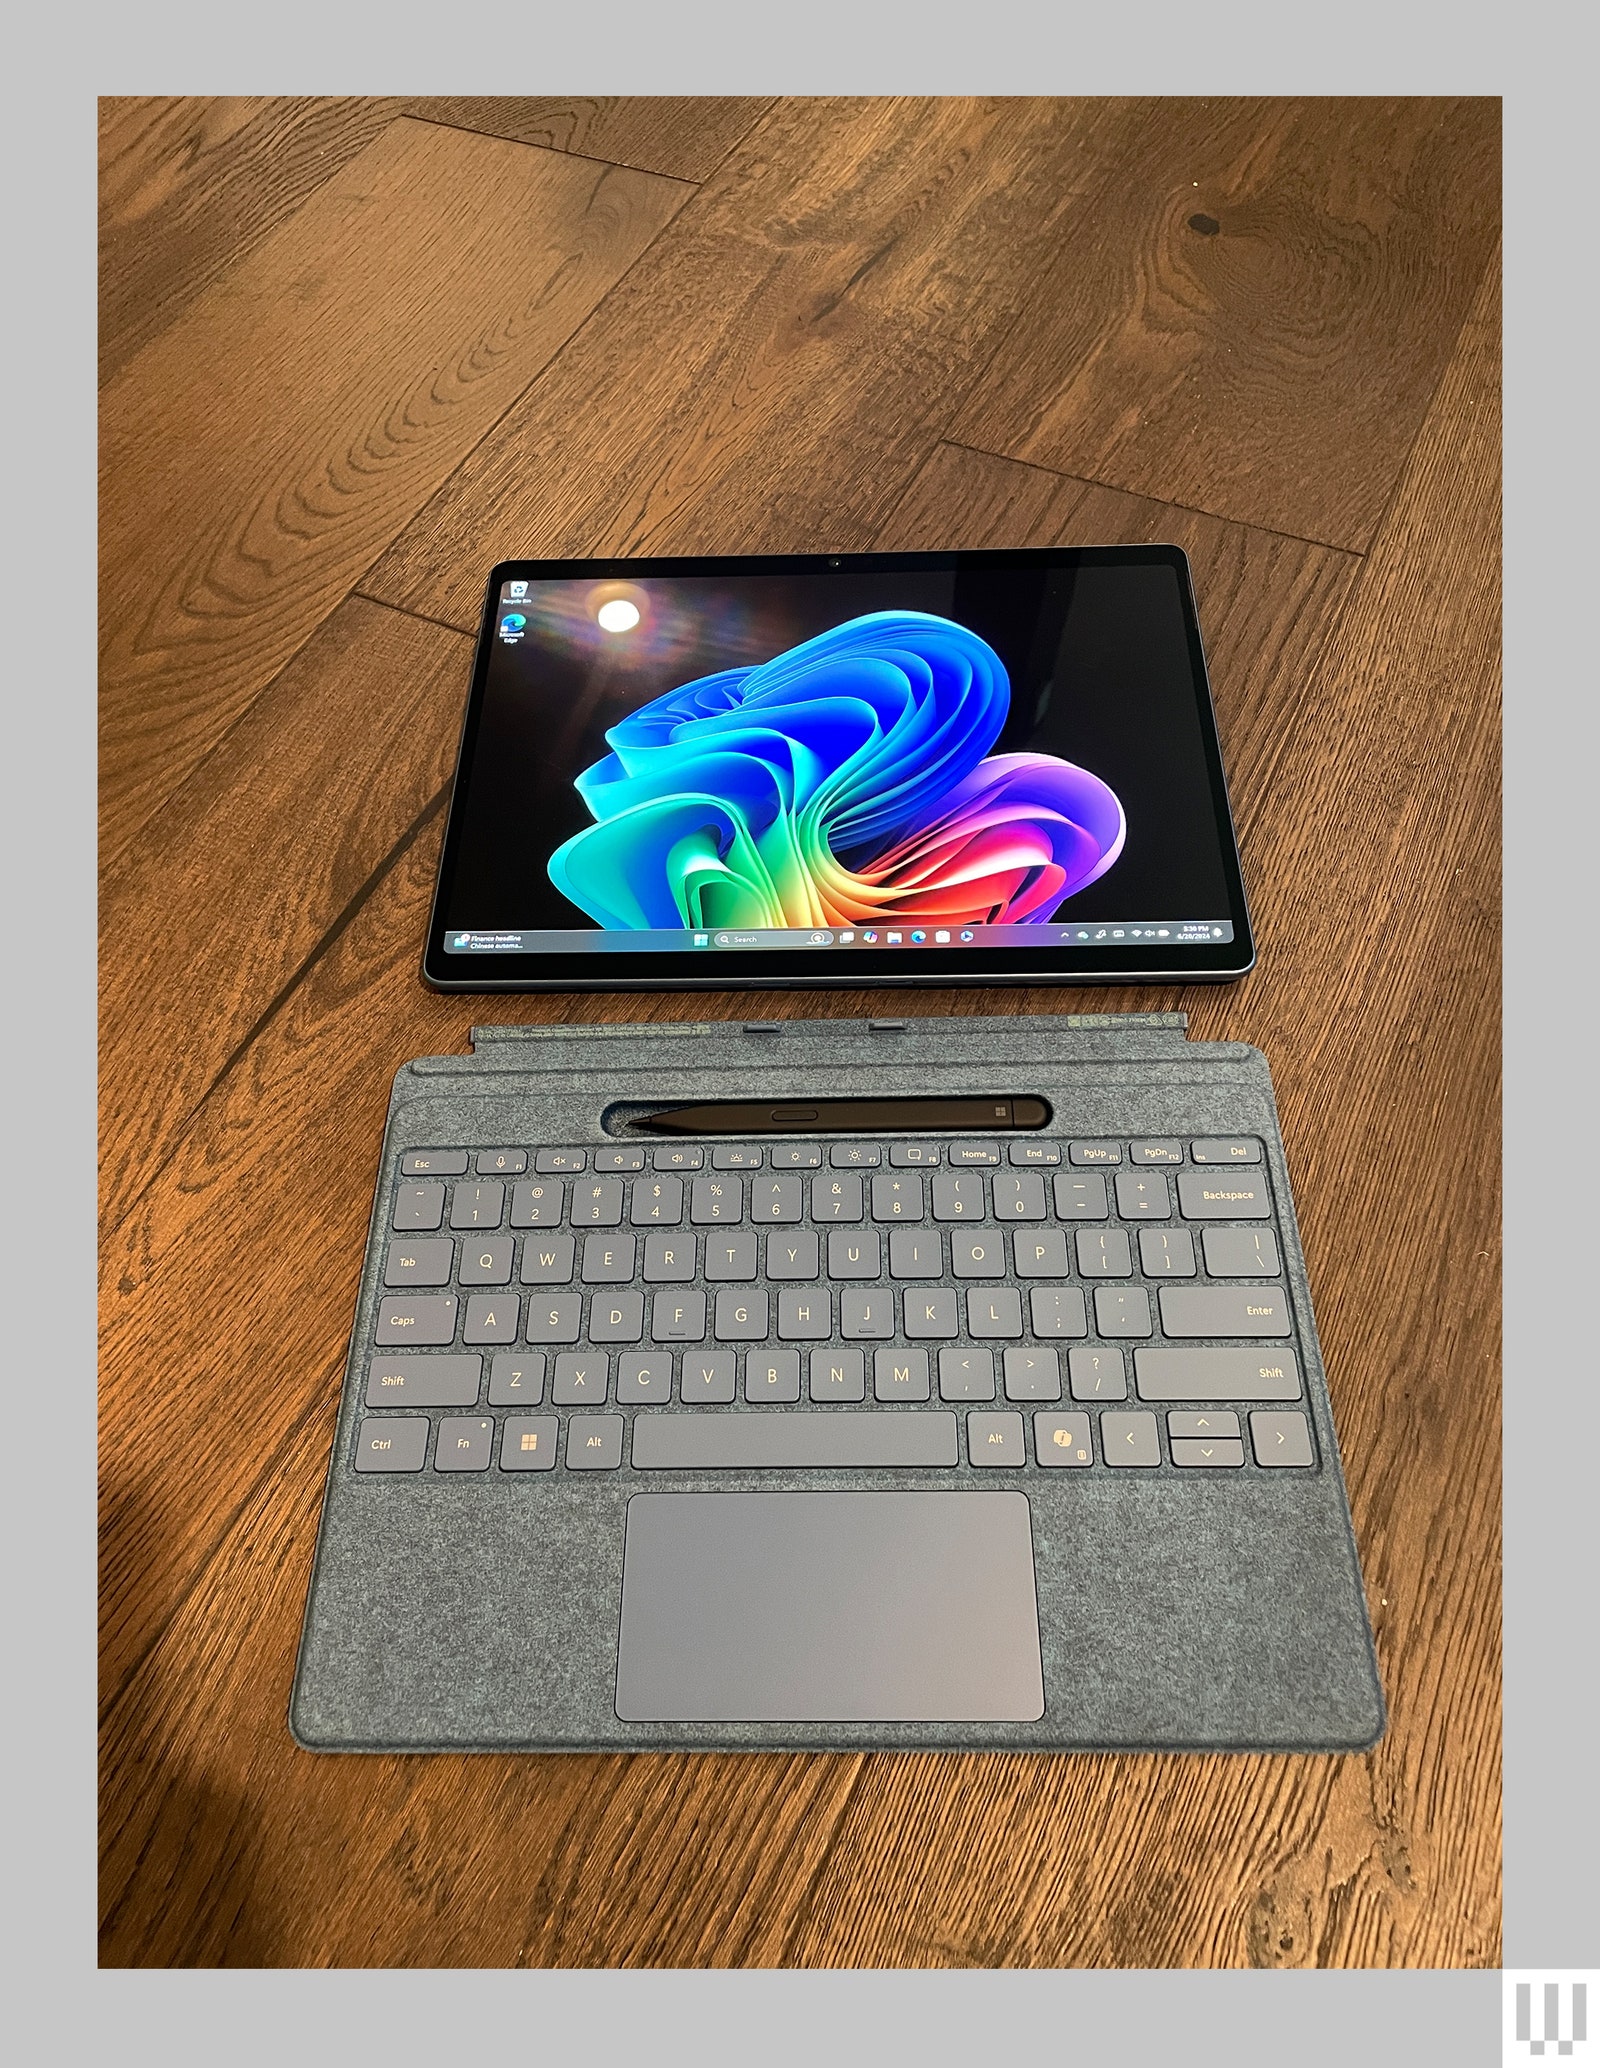 Tablet laying flat on a wooden floor separate from a detachable keyboard and stylus